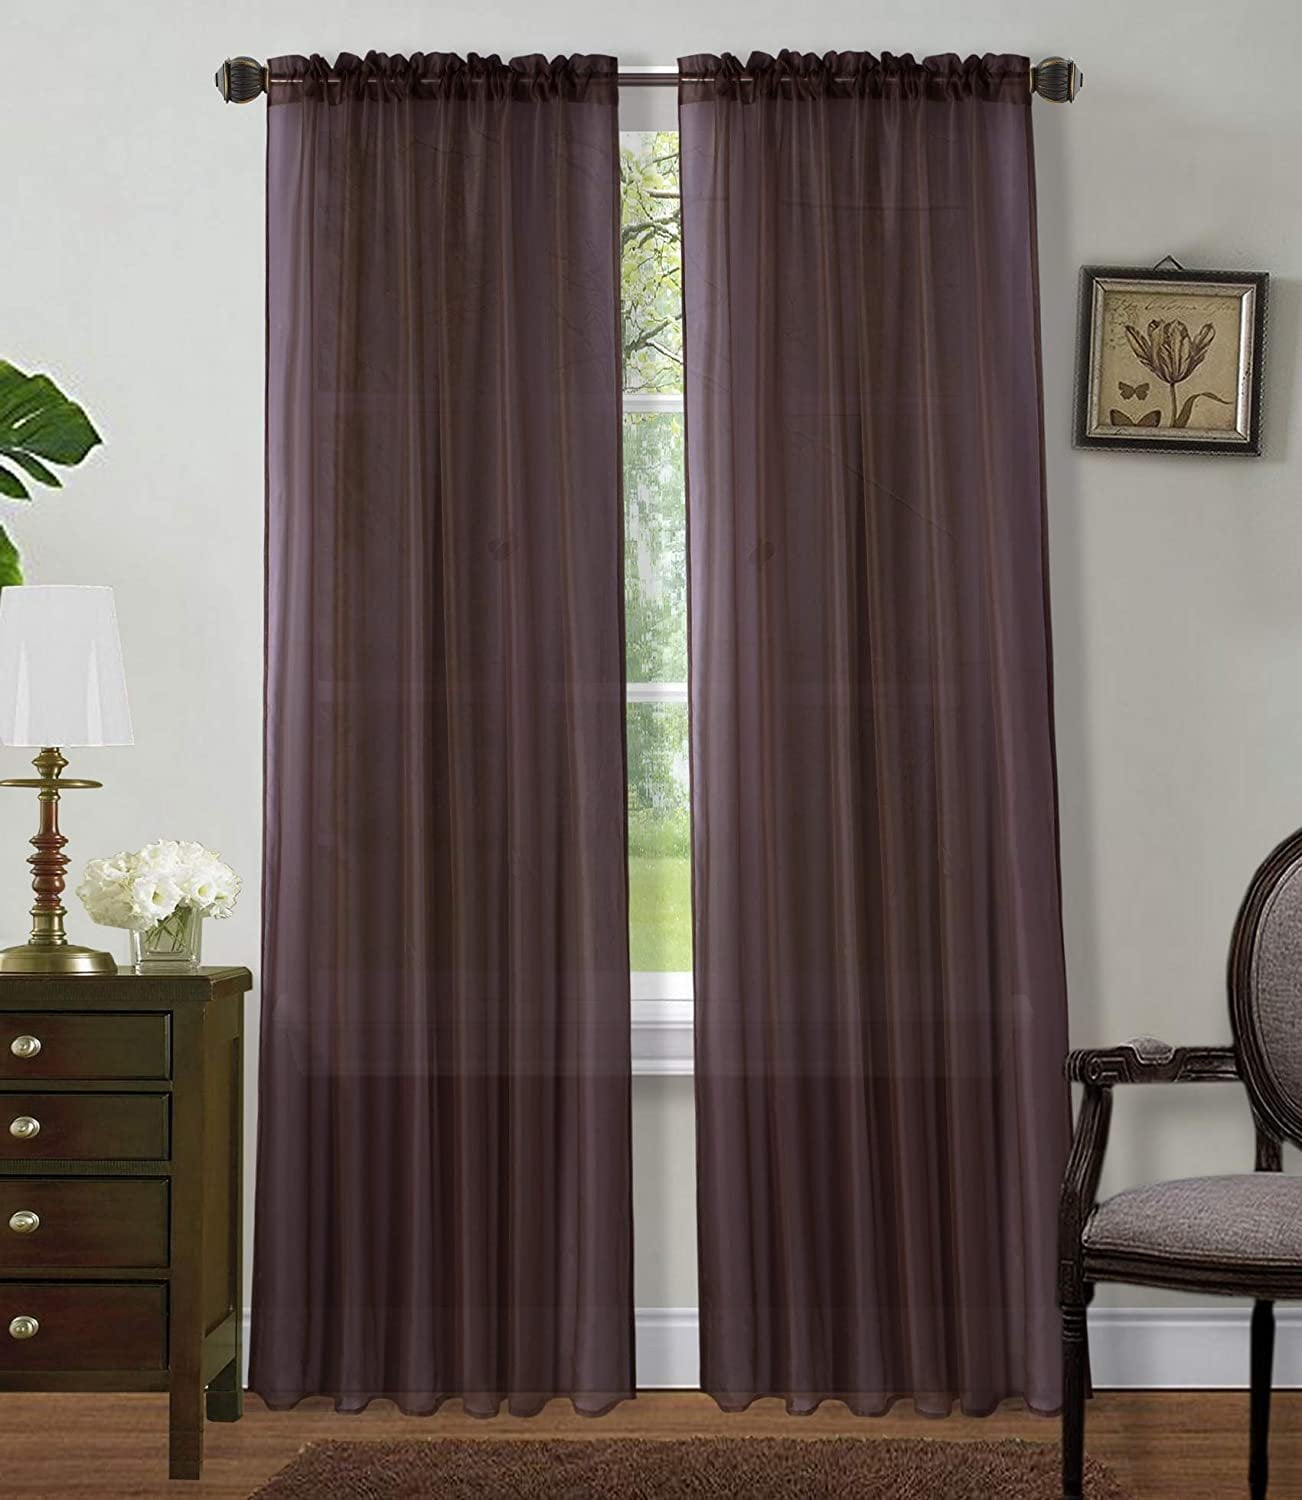 2 Panels Window Sheer Curtains 54 X 63 Inches 108 Total Width Voile For Bedroom Living Room Rod Pocket Decorative Solid Brown Com